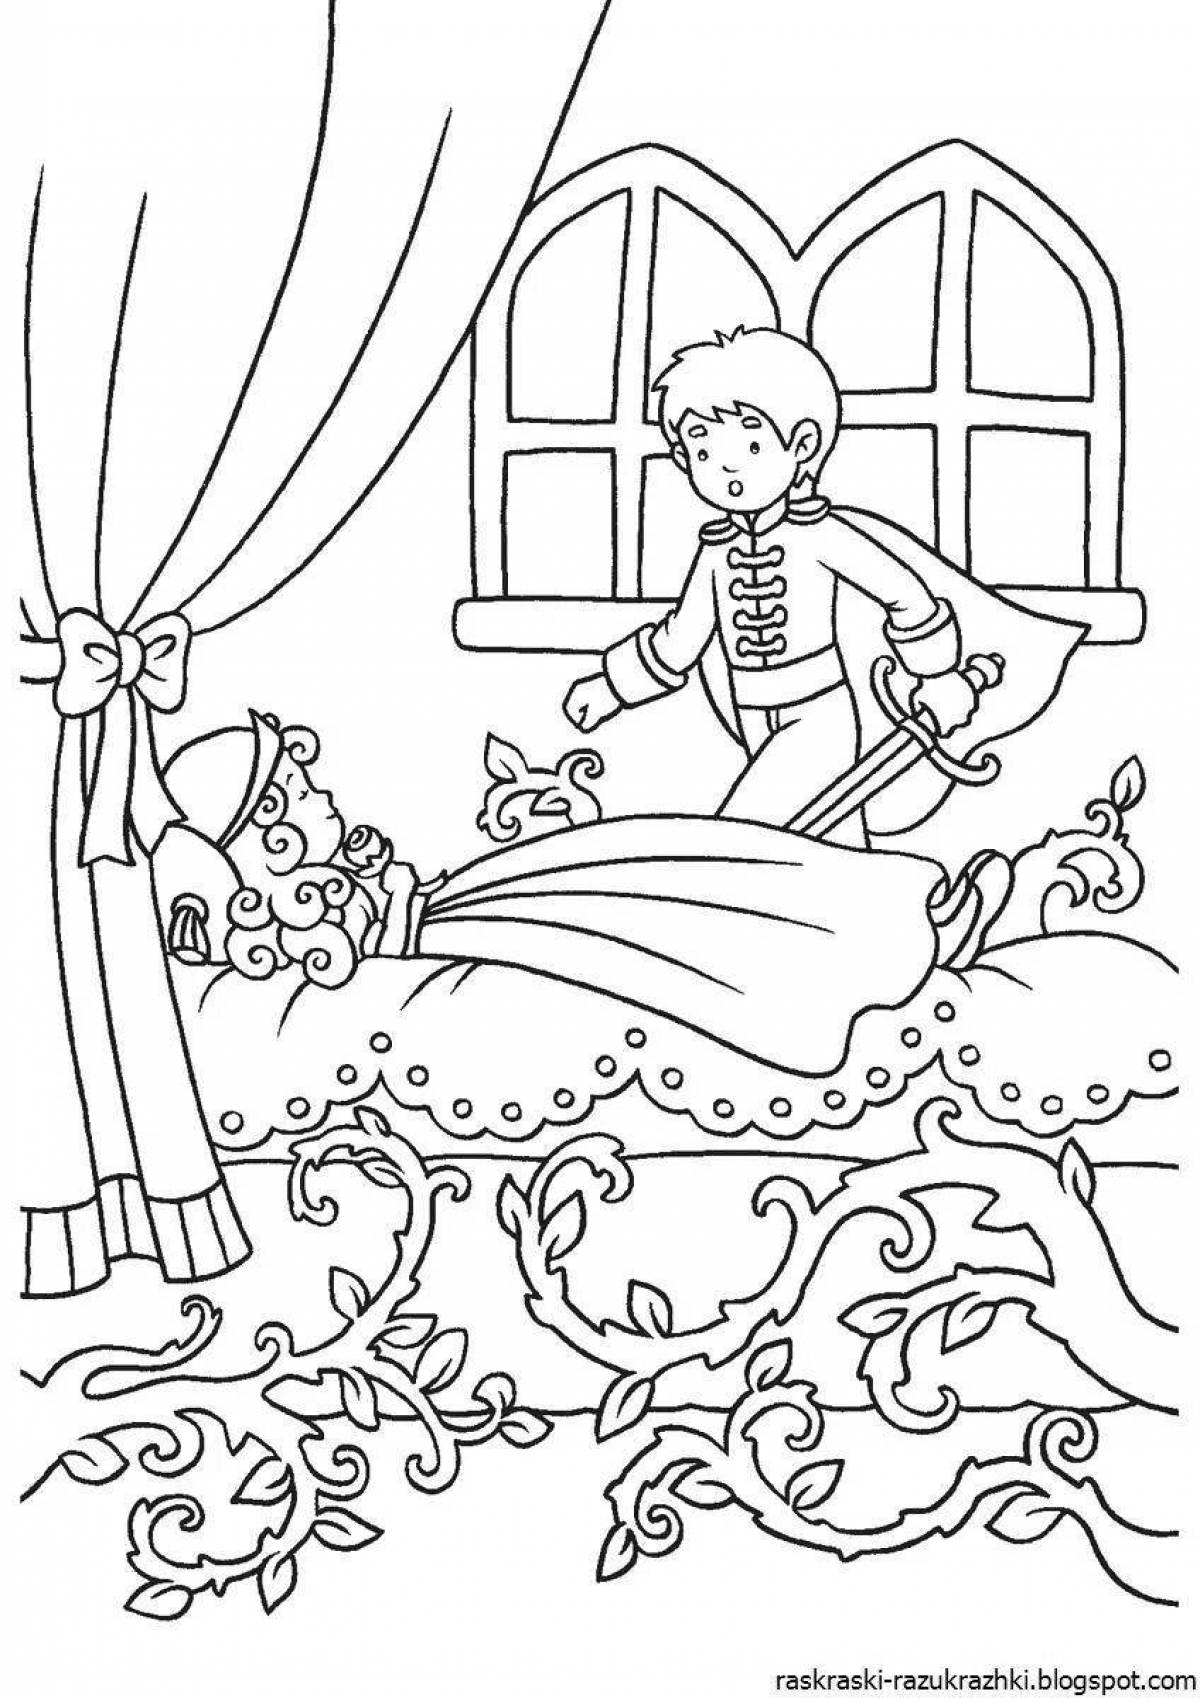 Great fairytale coloring book